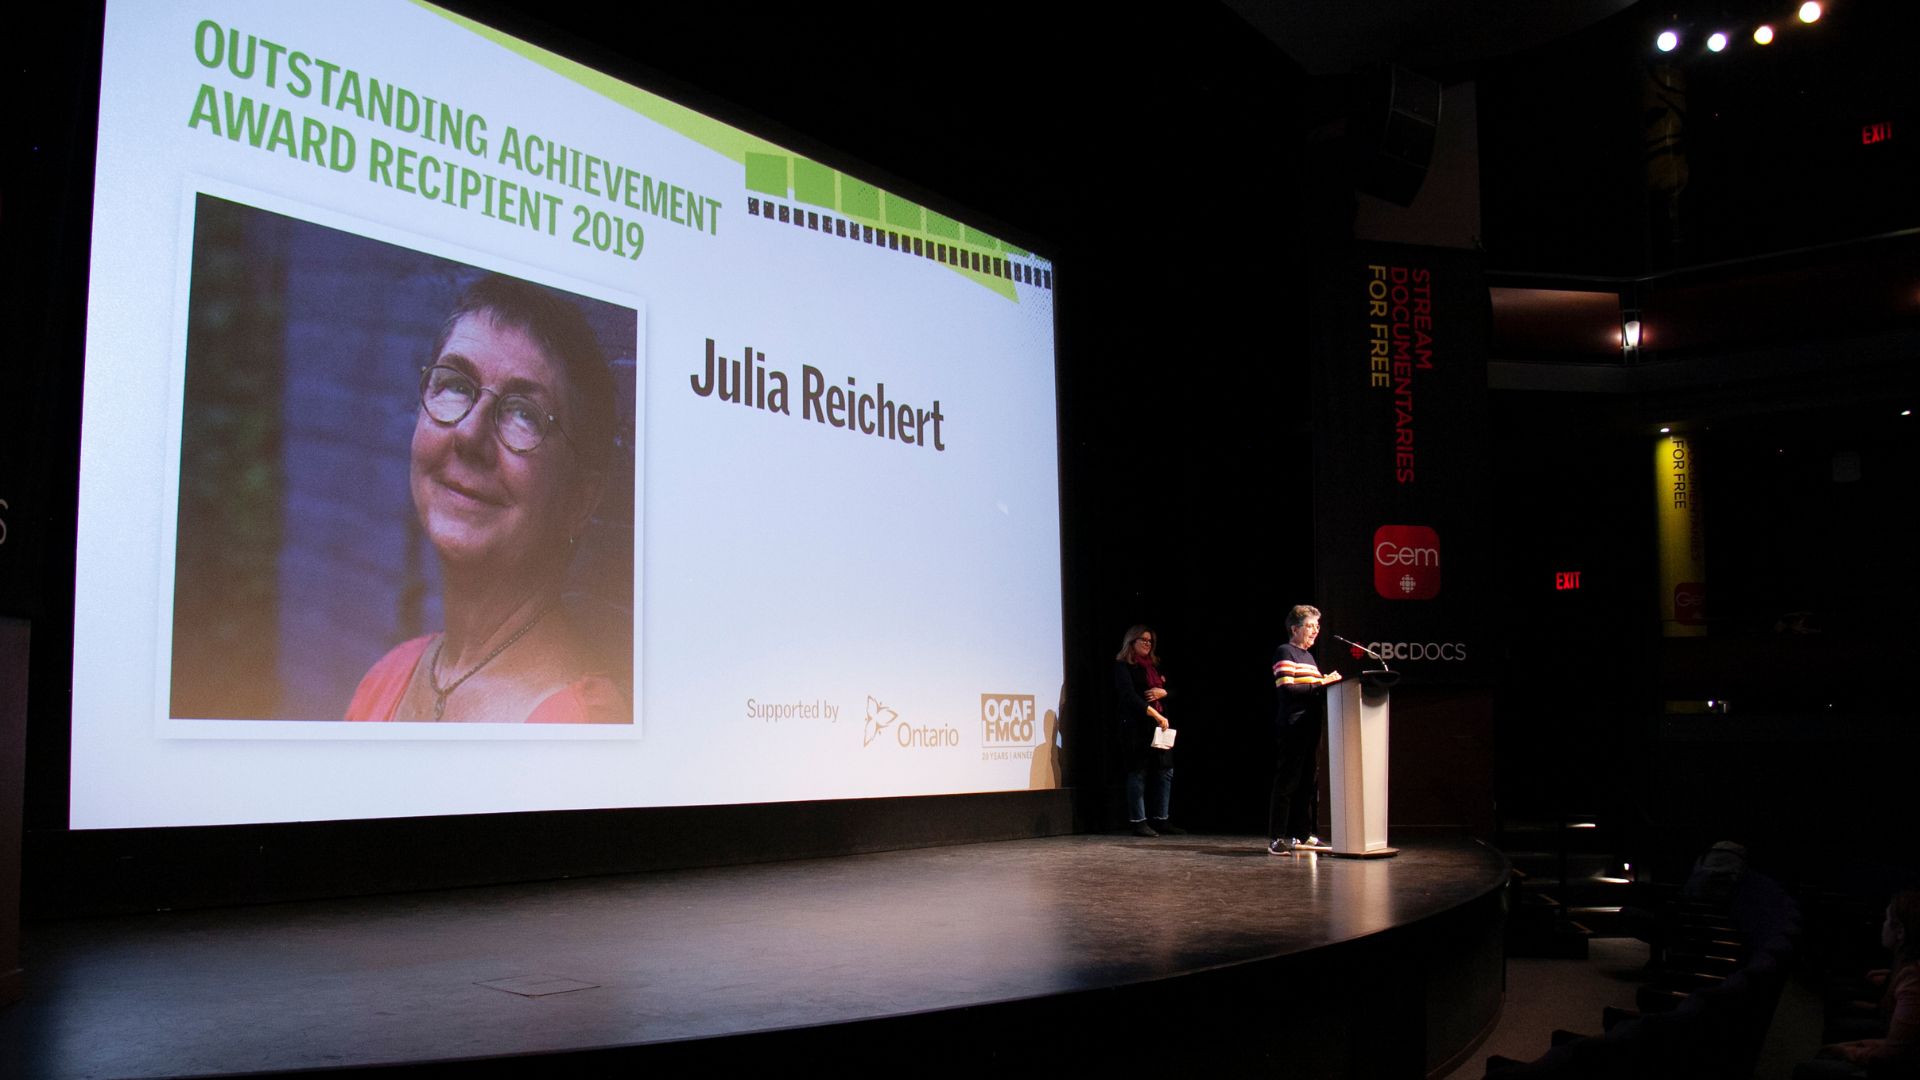 Julia Reichert accepts the Outstanding Achievement Award on-stage at Hot Docs 2019